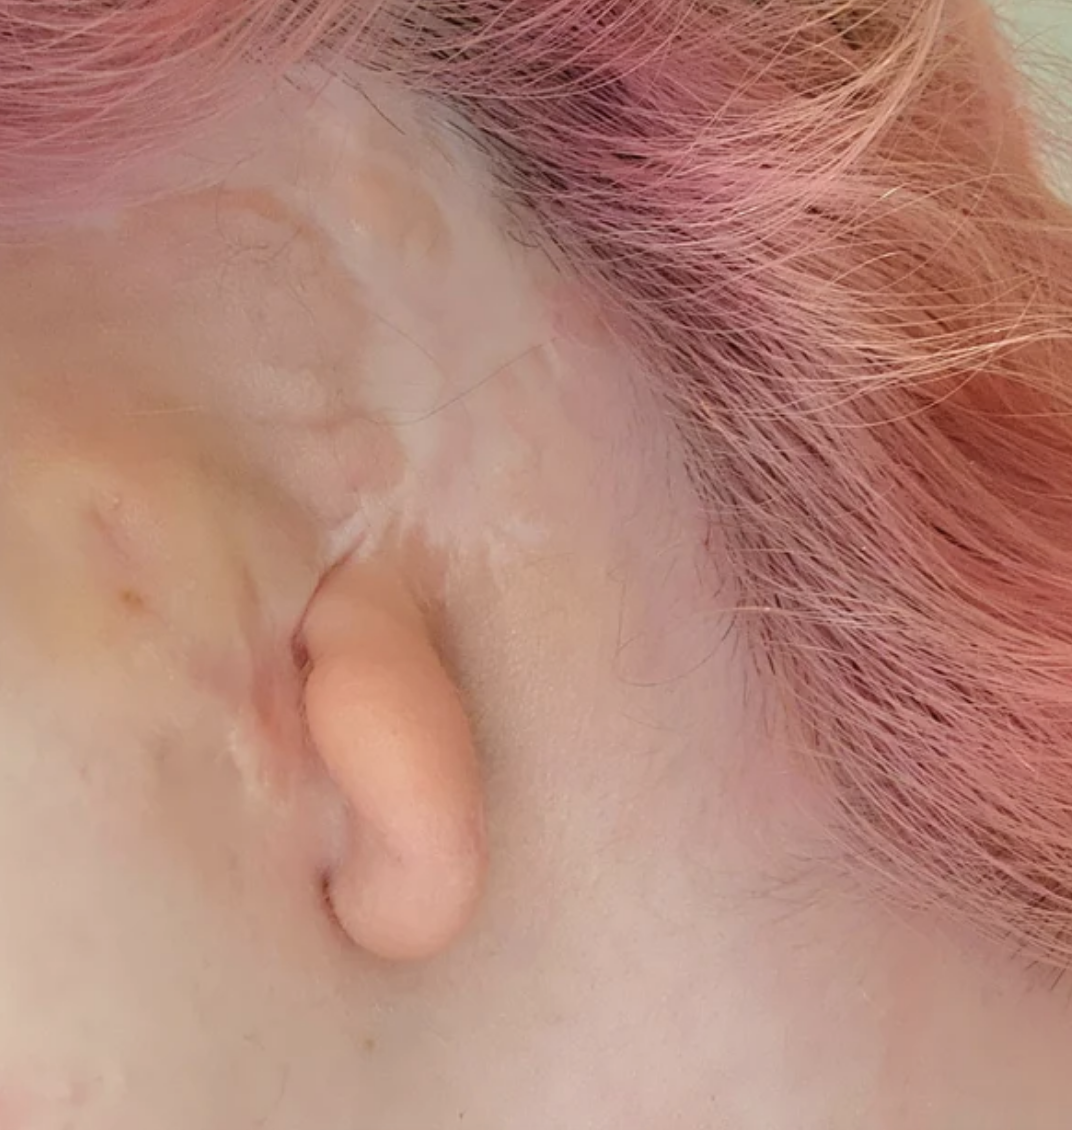 earlobe sticking out of their head